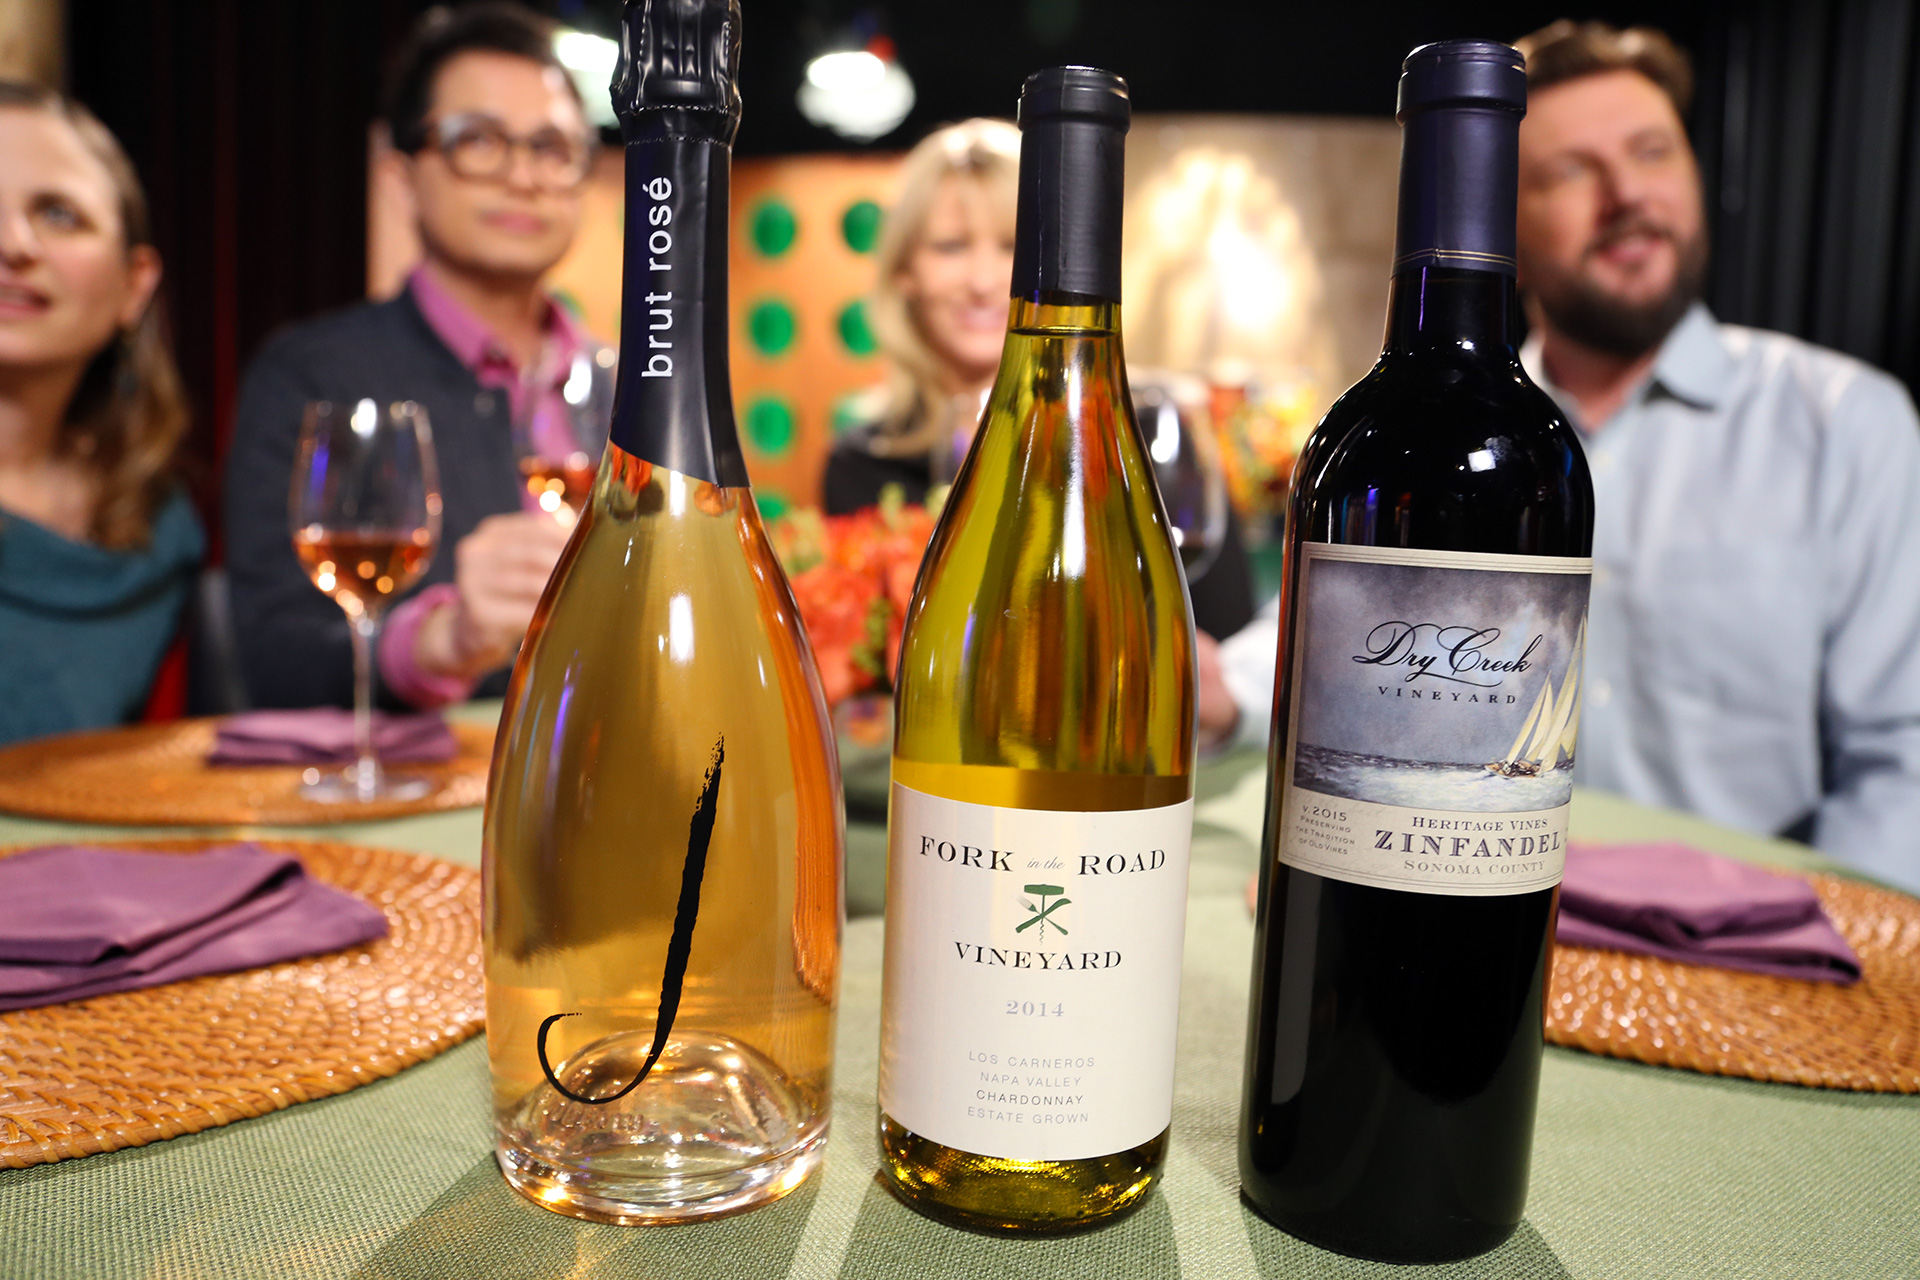 Wine that guests drank on the set of season 13 episode 9.